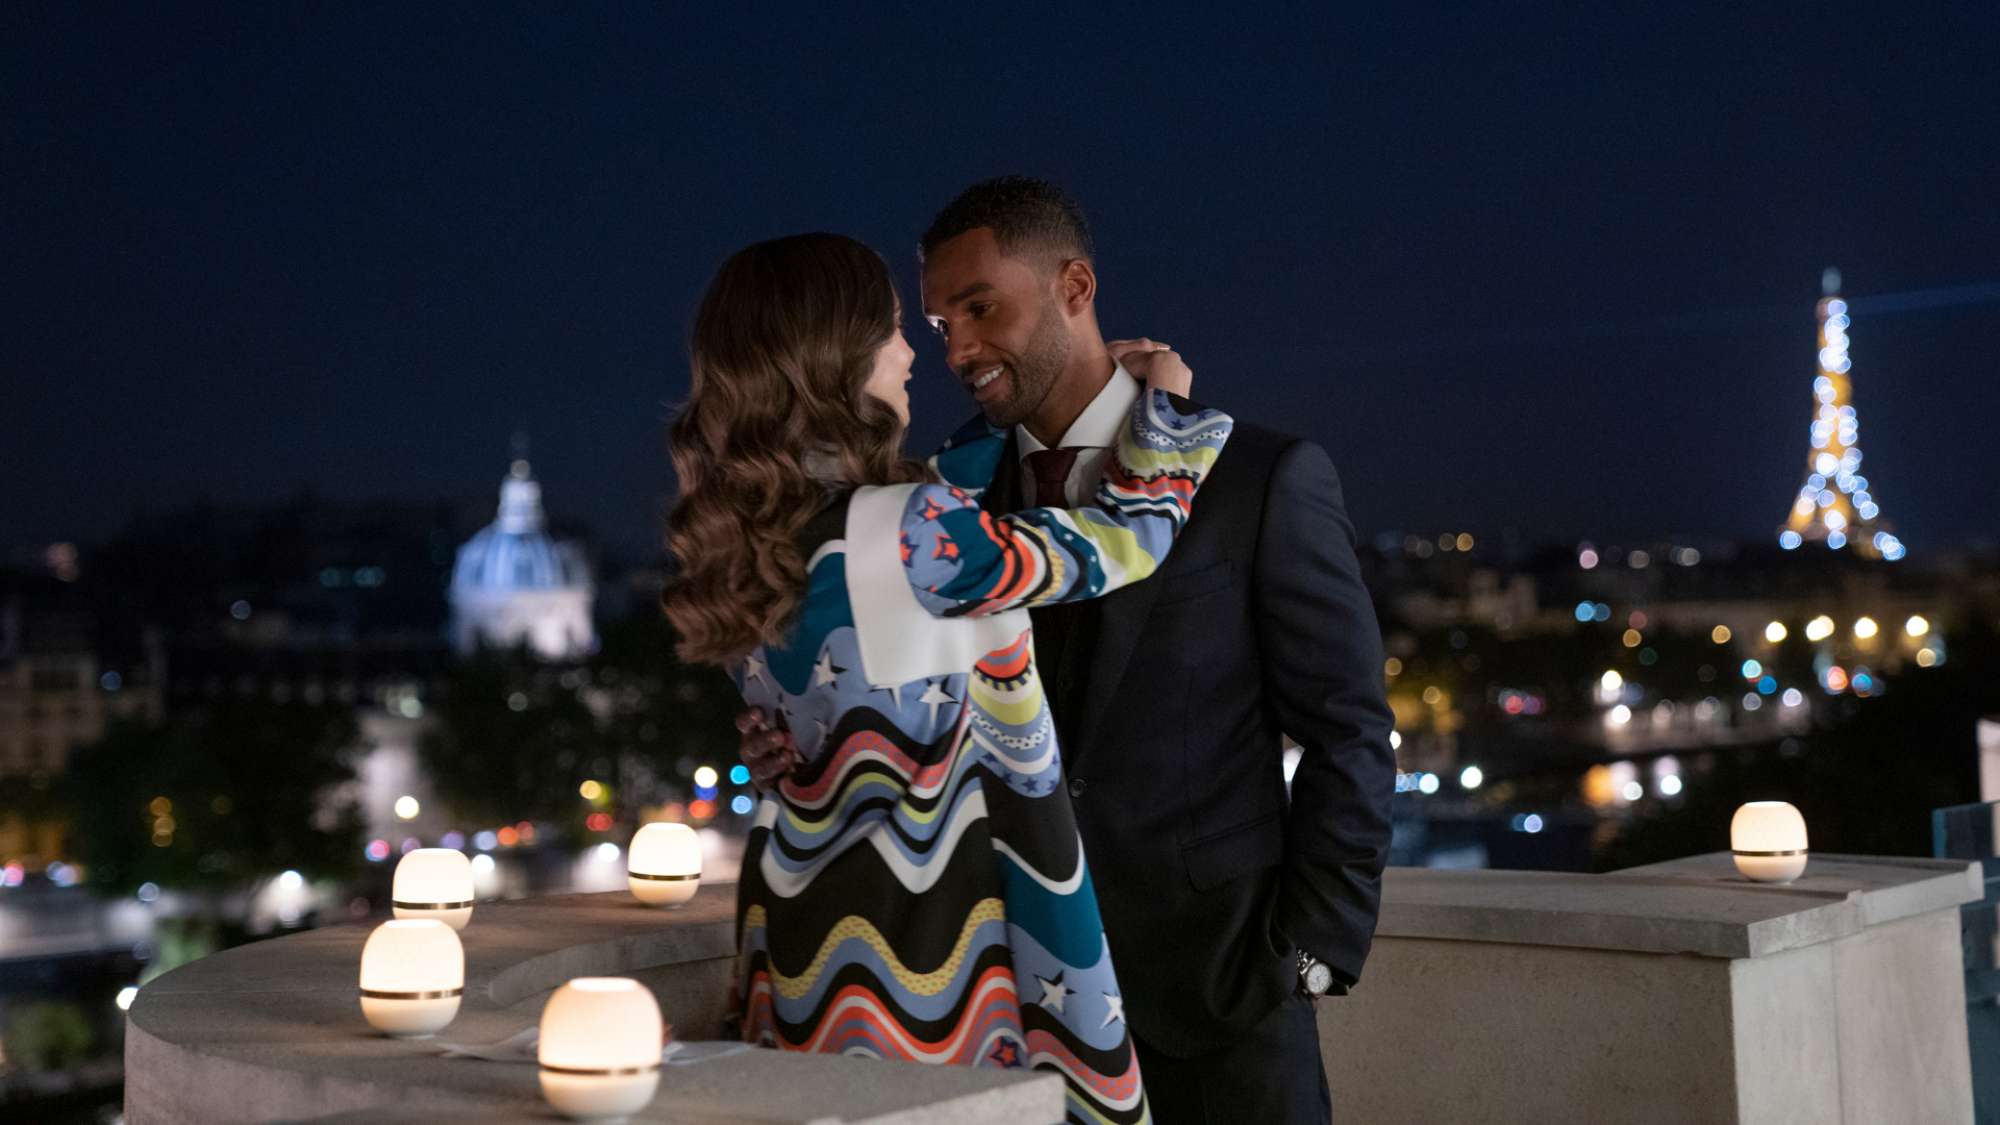 A scene from "Emily in Paris" Season 2: couple kissing in Paris